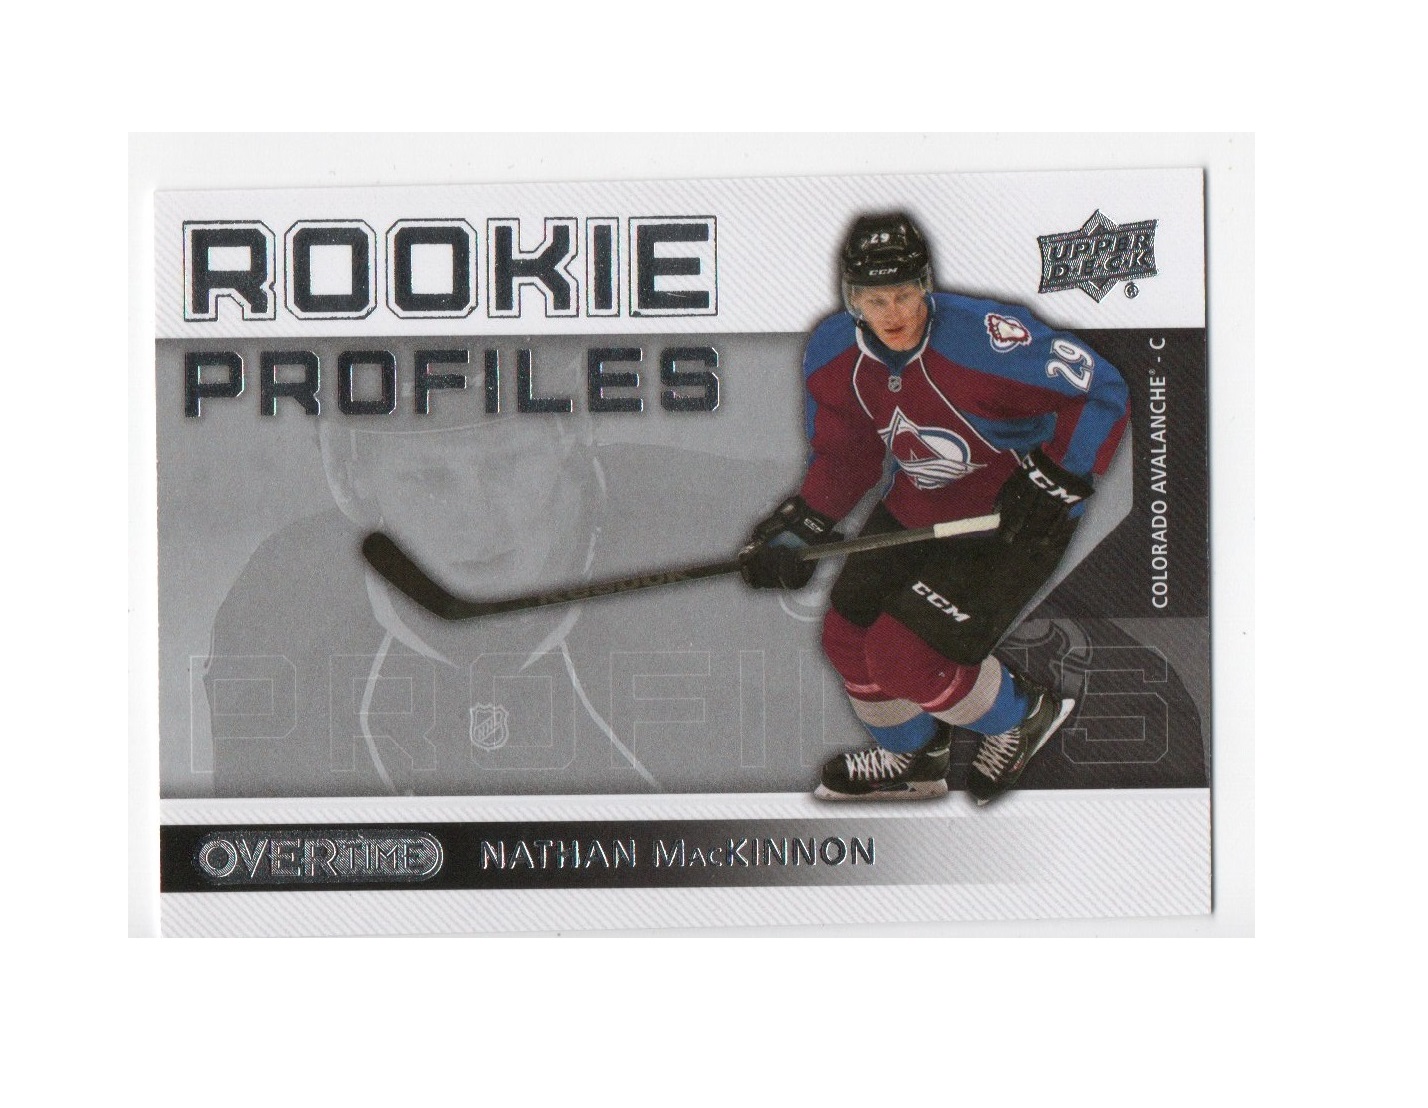 2013-14 Upper Deck Overtime Rookie Profiles #RP31 Nathan MacKinnon (40-X58-AVALANCHE)